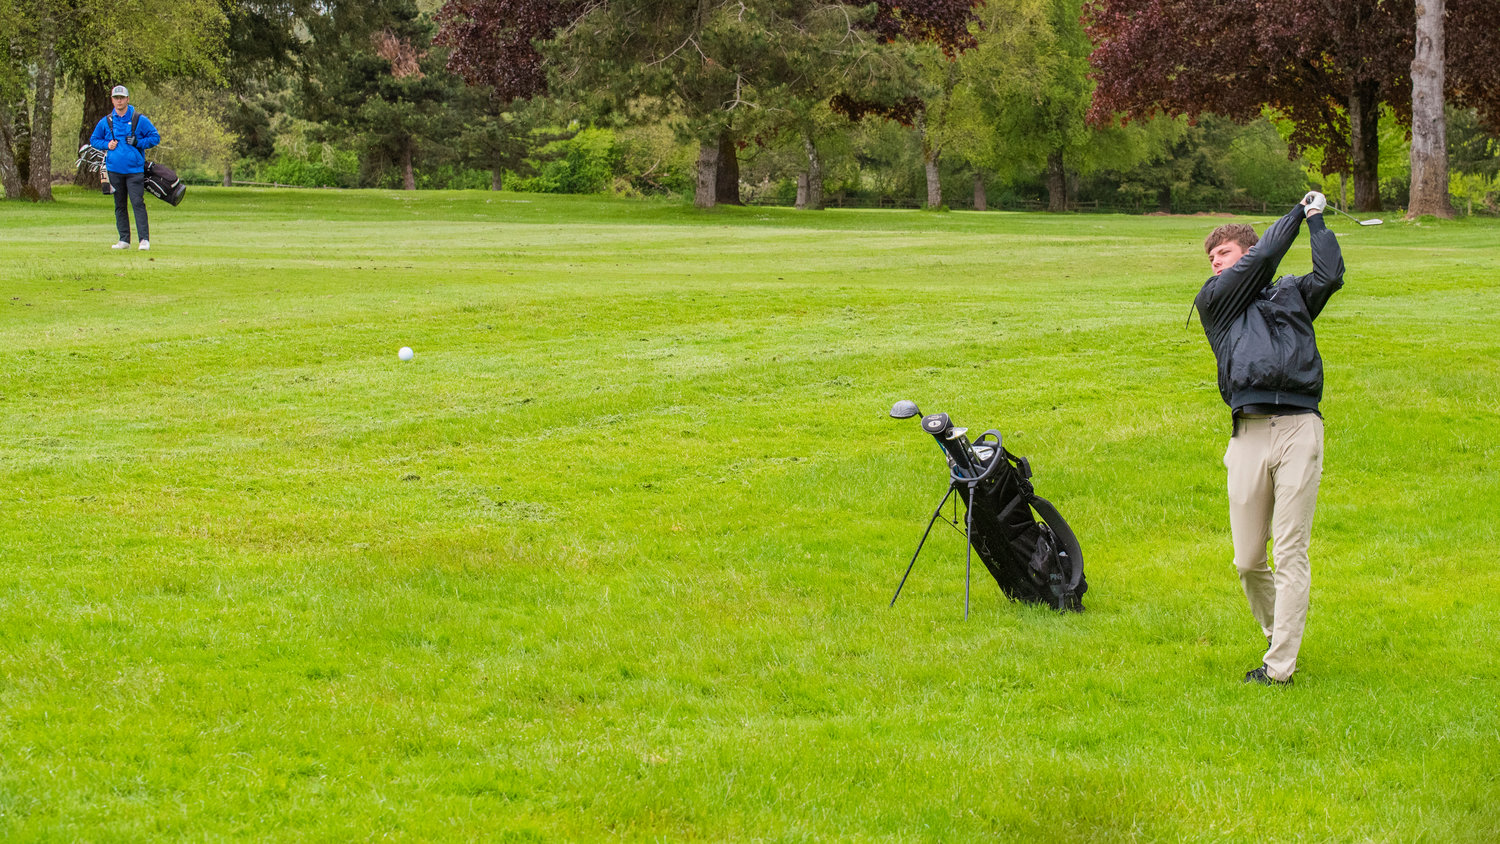 Adna’s Chase Collins swings his club as the ball flies Wednesday in Chehalis at Riverside Golf Course.